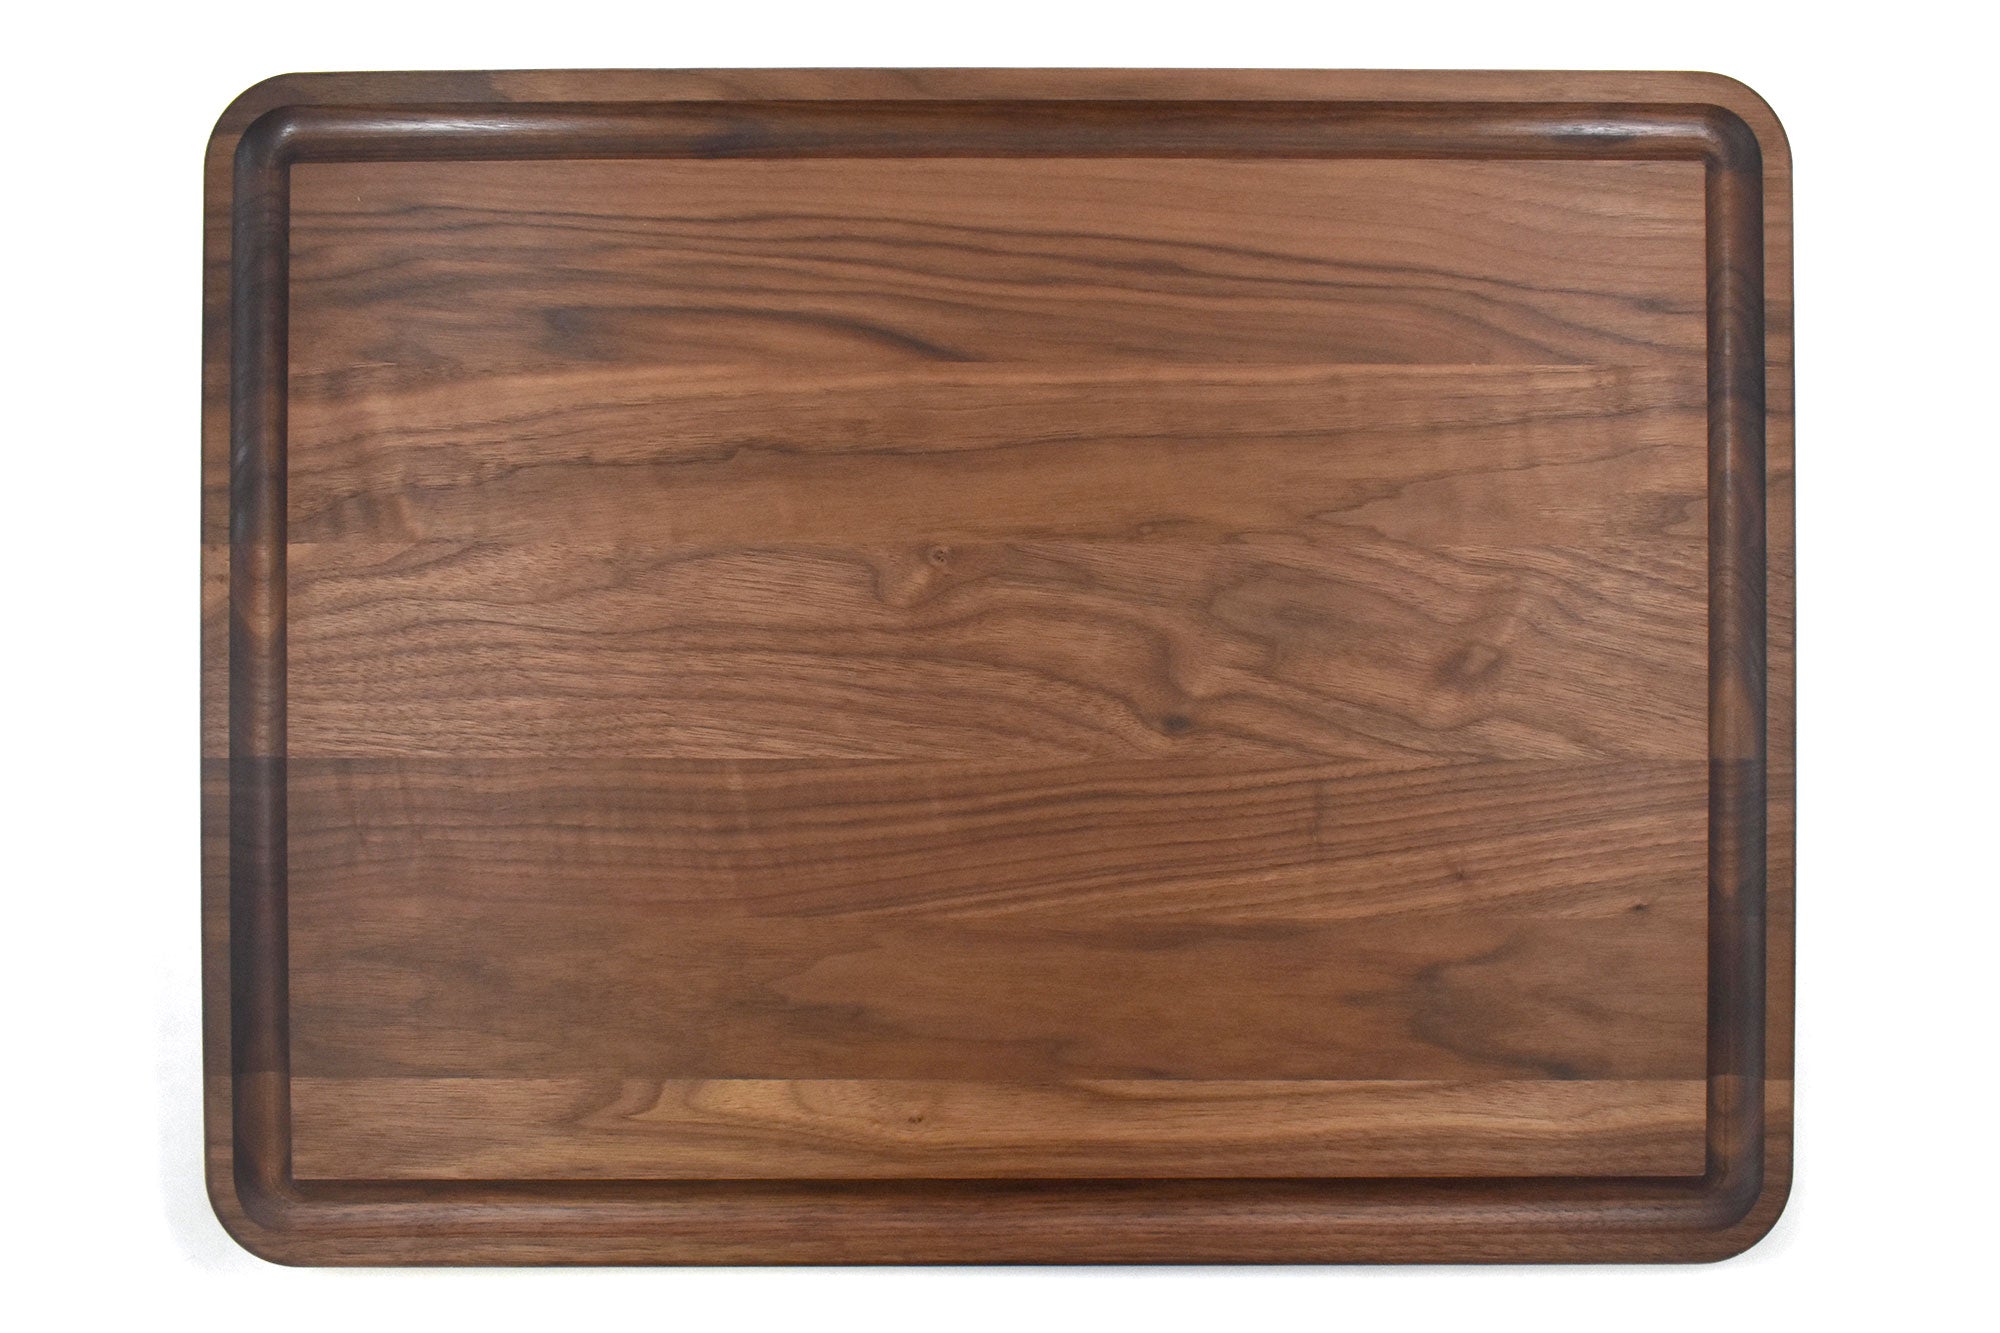 Woodsman & Kingsize Cutting Boards-Choose your wood and design